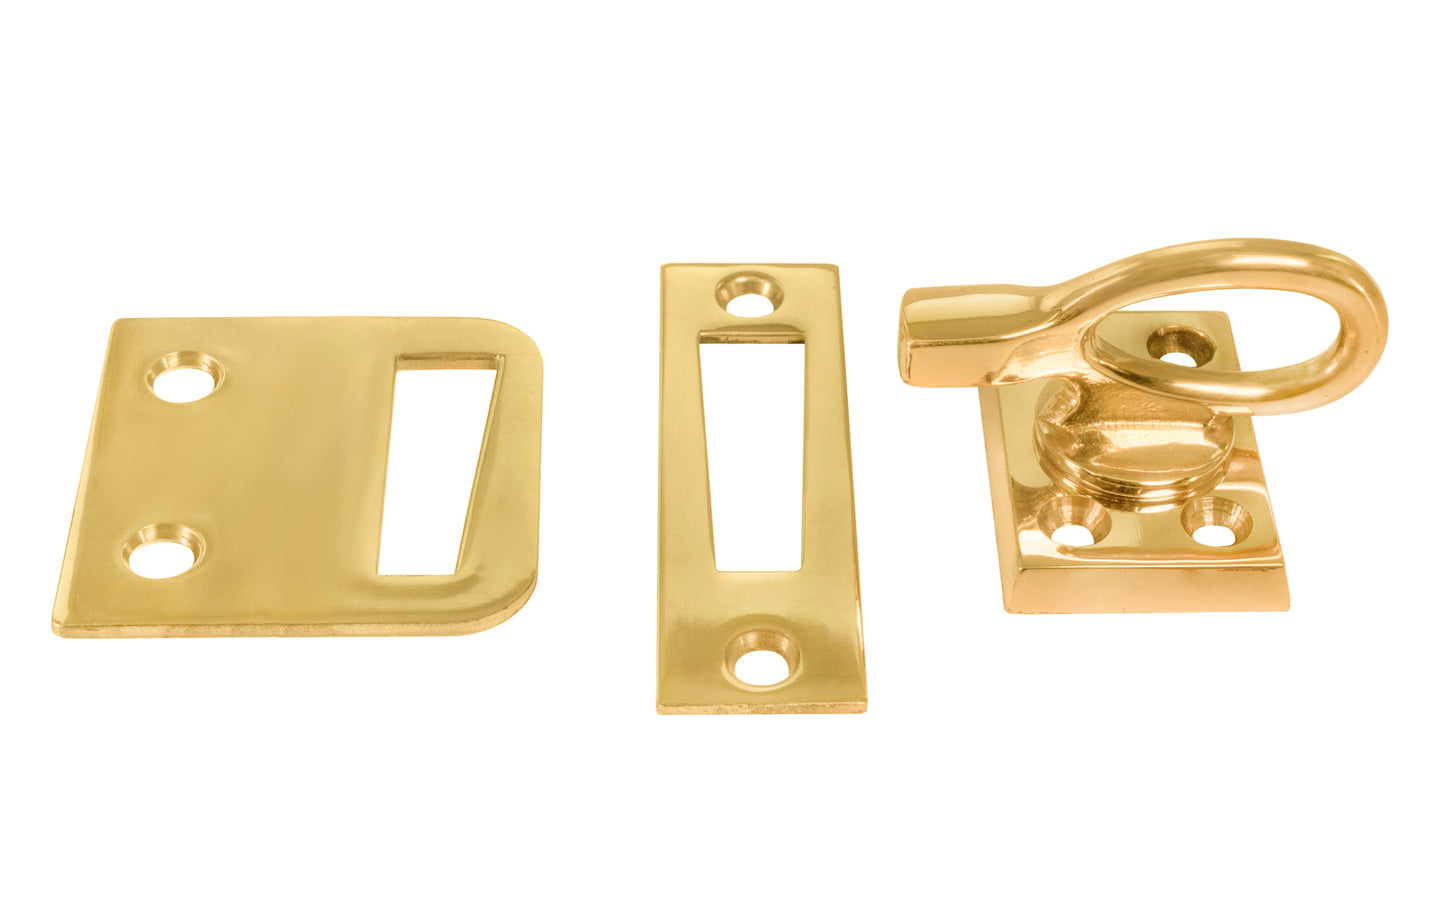 Vintage-style Hardware · Classic & traditional ring handle window casement latch made of quality solid brass. Latches & locks casement window frames. Durable strong pivot turn for sturdy operation. Unlacqeured Brass (will patina over time). Non-lacquered Brass. Un-lacquered brass.